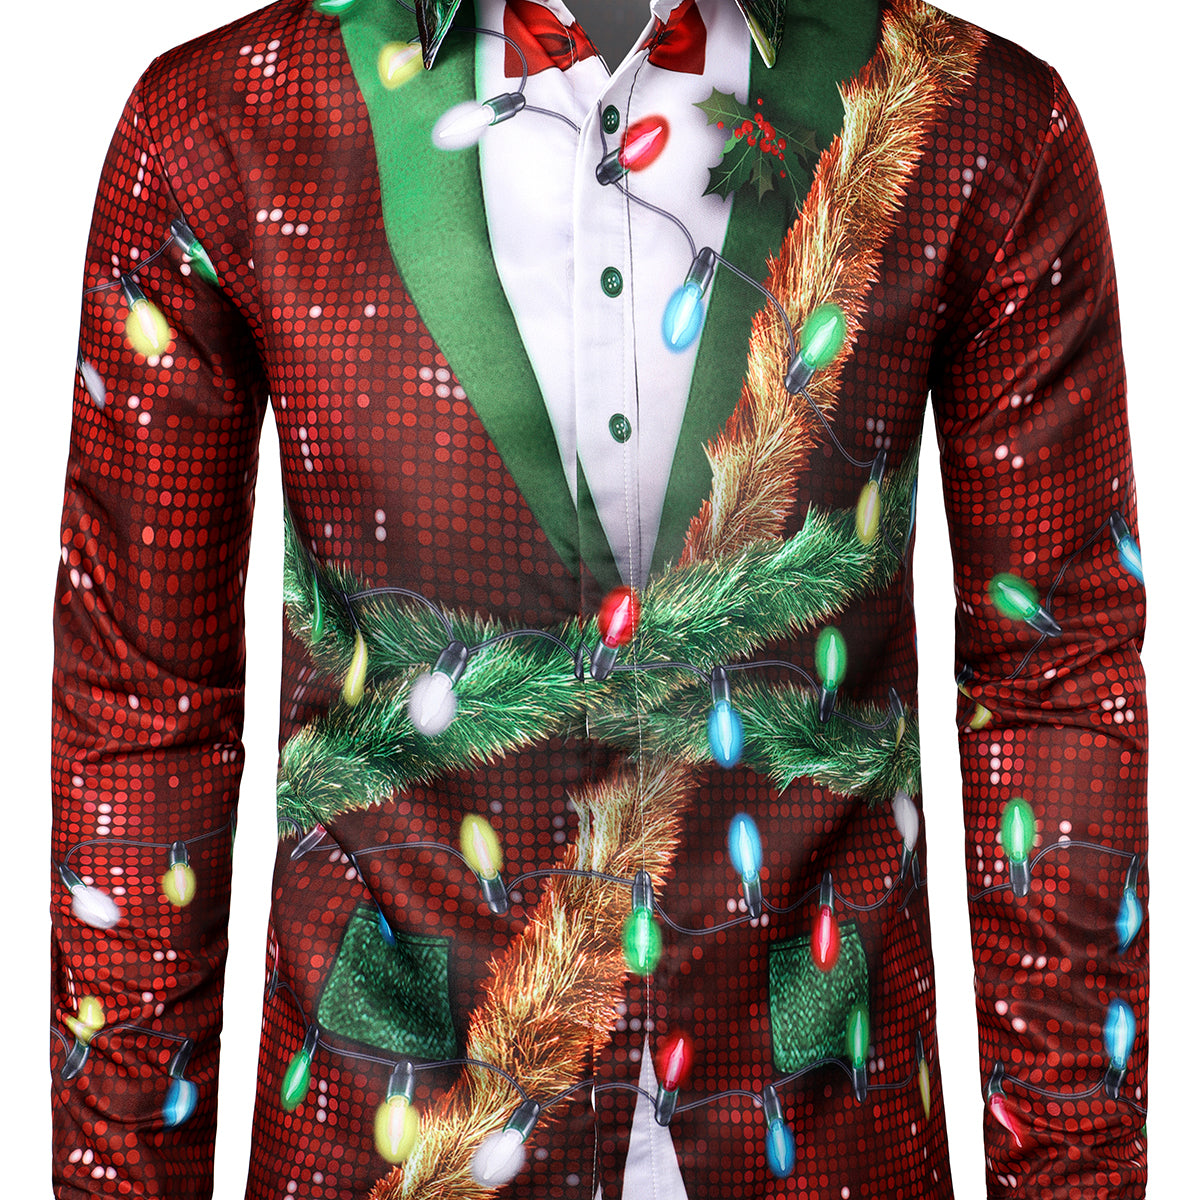 Men's Christmas Funny Outfit Themed Top Vacation Disco Button Long Sleeve Dress Shirt